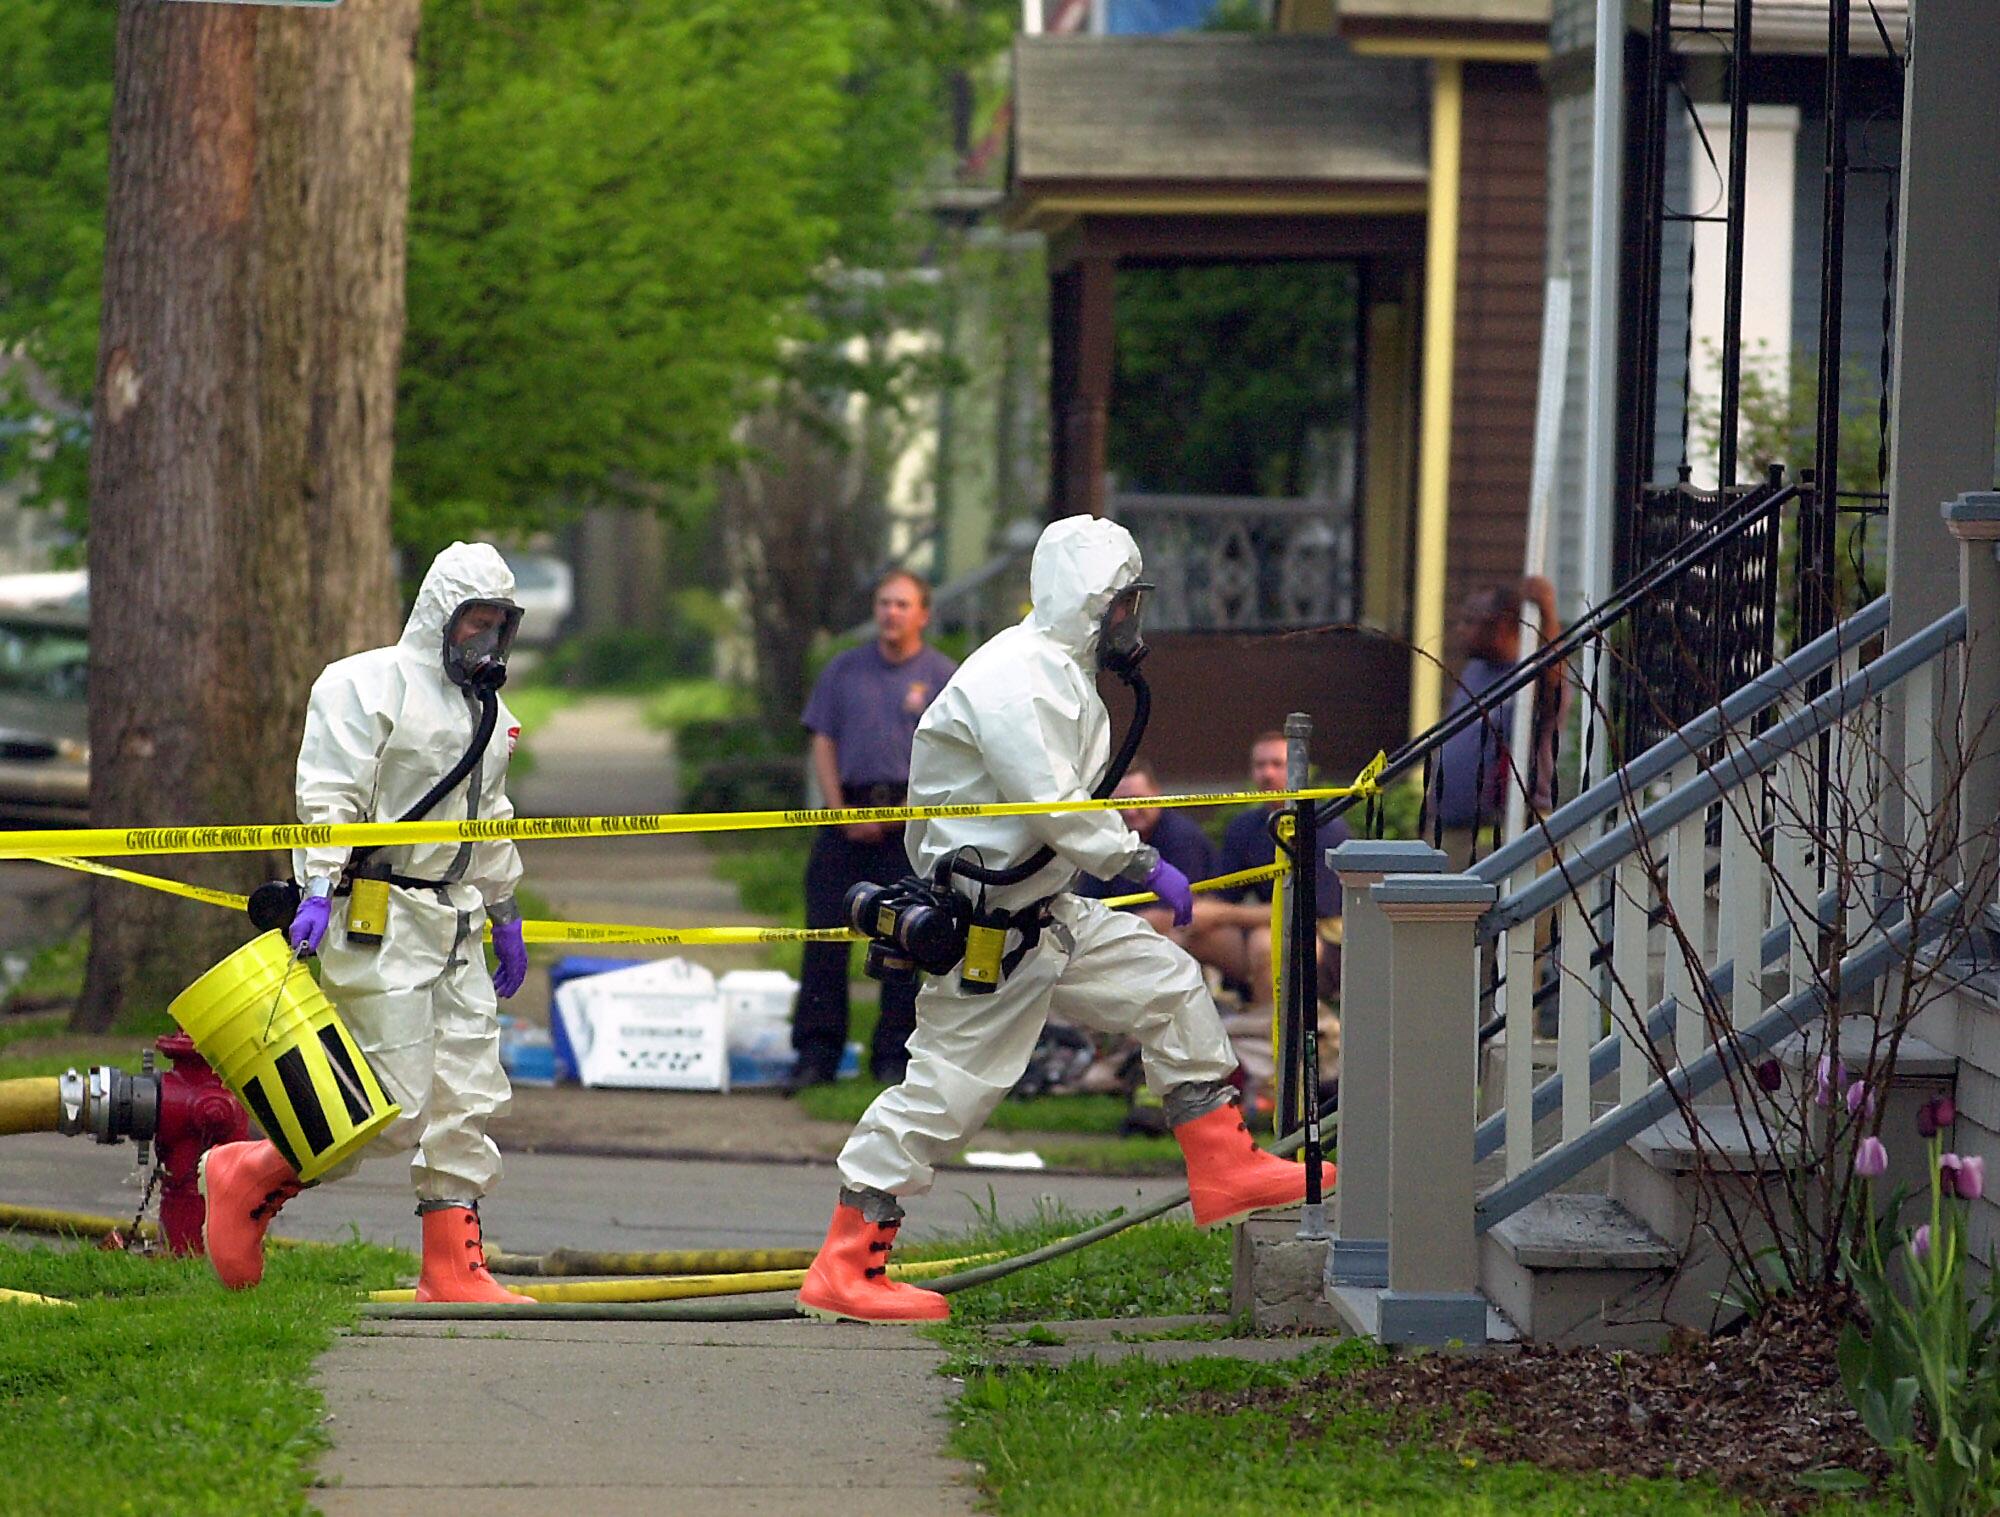 Two people in white hazmat suits and respirators head toward the steps of a home cordoned off with yellow tape